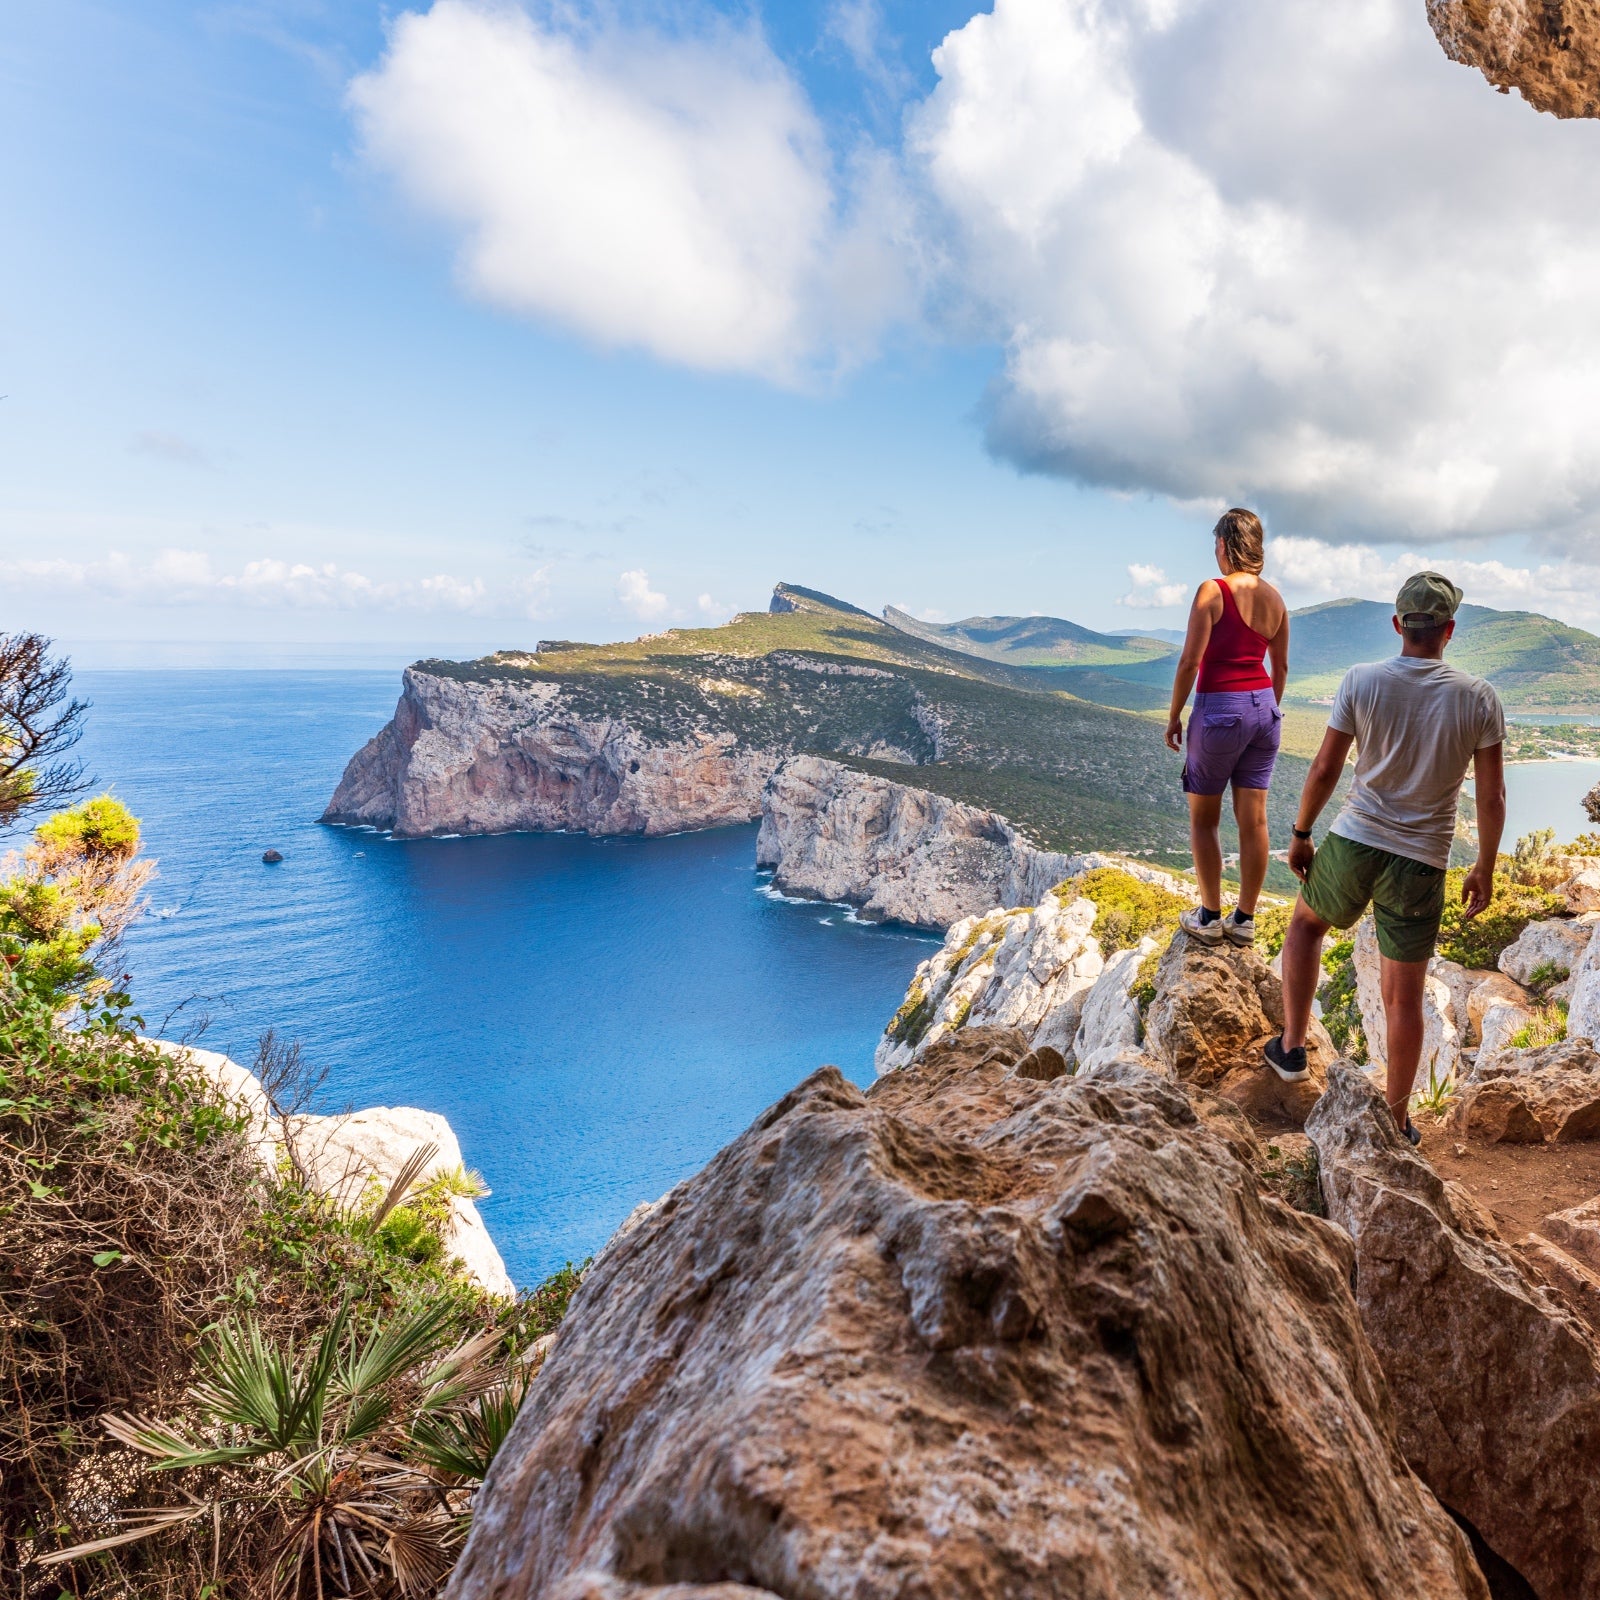 A couple on a bluff in Sardinia look down over the cliffs and blue sea.